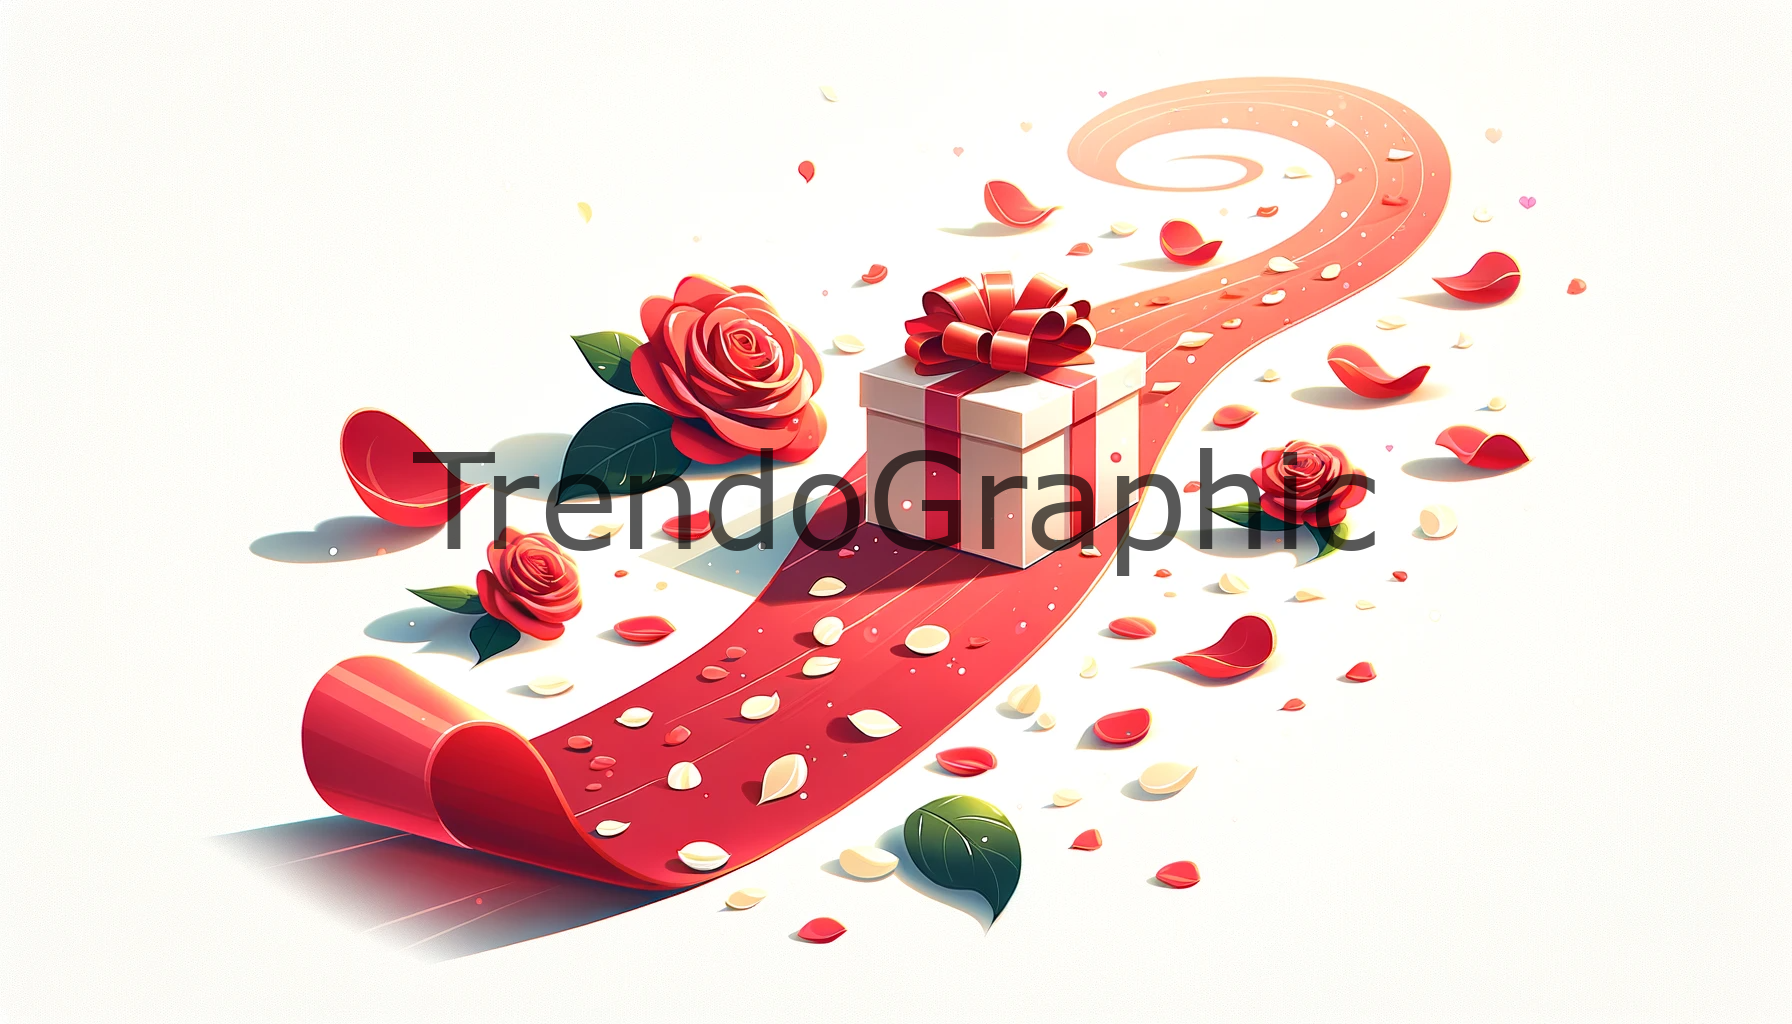 Romantic Surprise: A Trail of Rose Petals Leading to a Gift